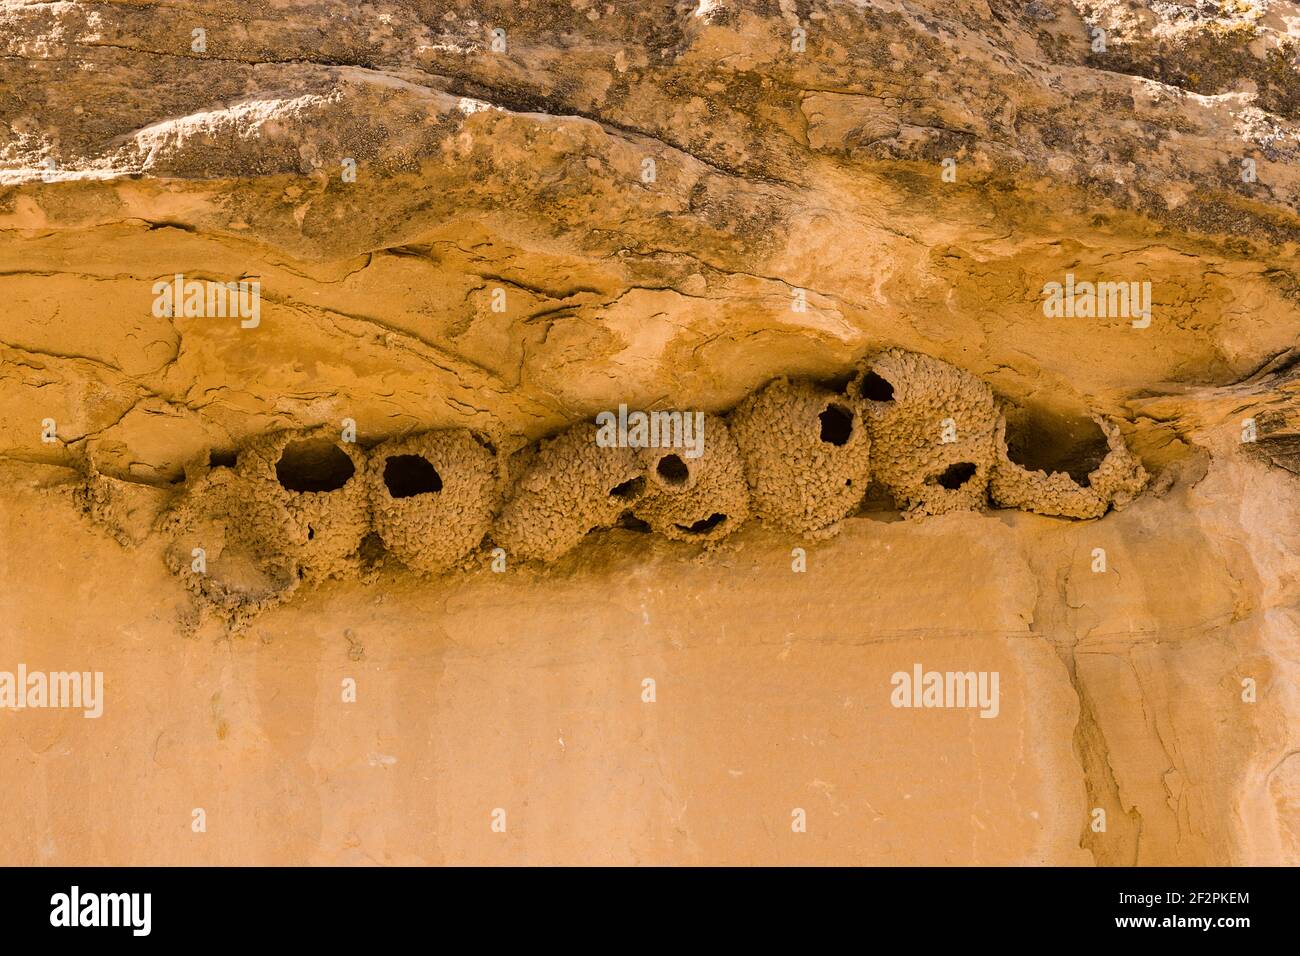 The Cliff Swallow, Petrochelidon fulva, builds nests in colonies out of mud under protective rock overhangs. Stock Photo